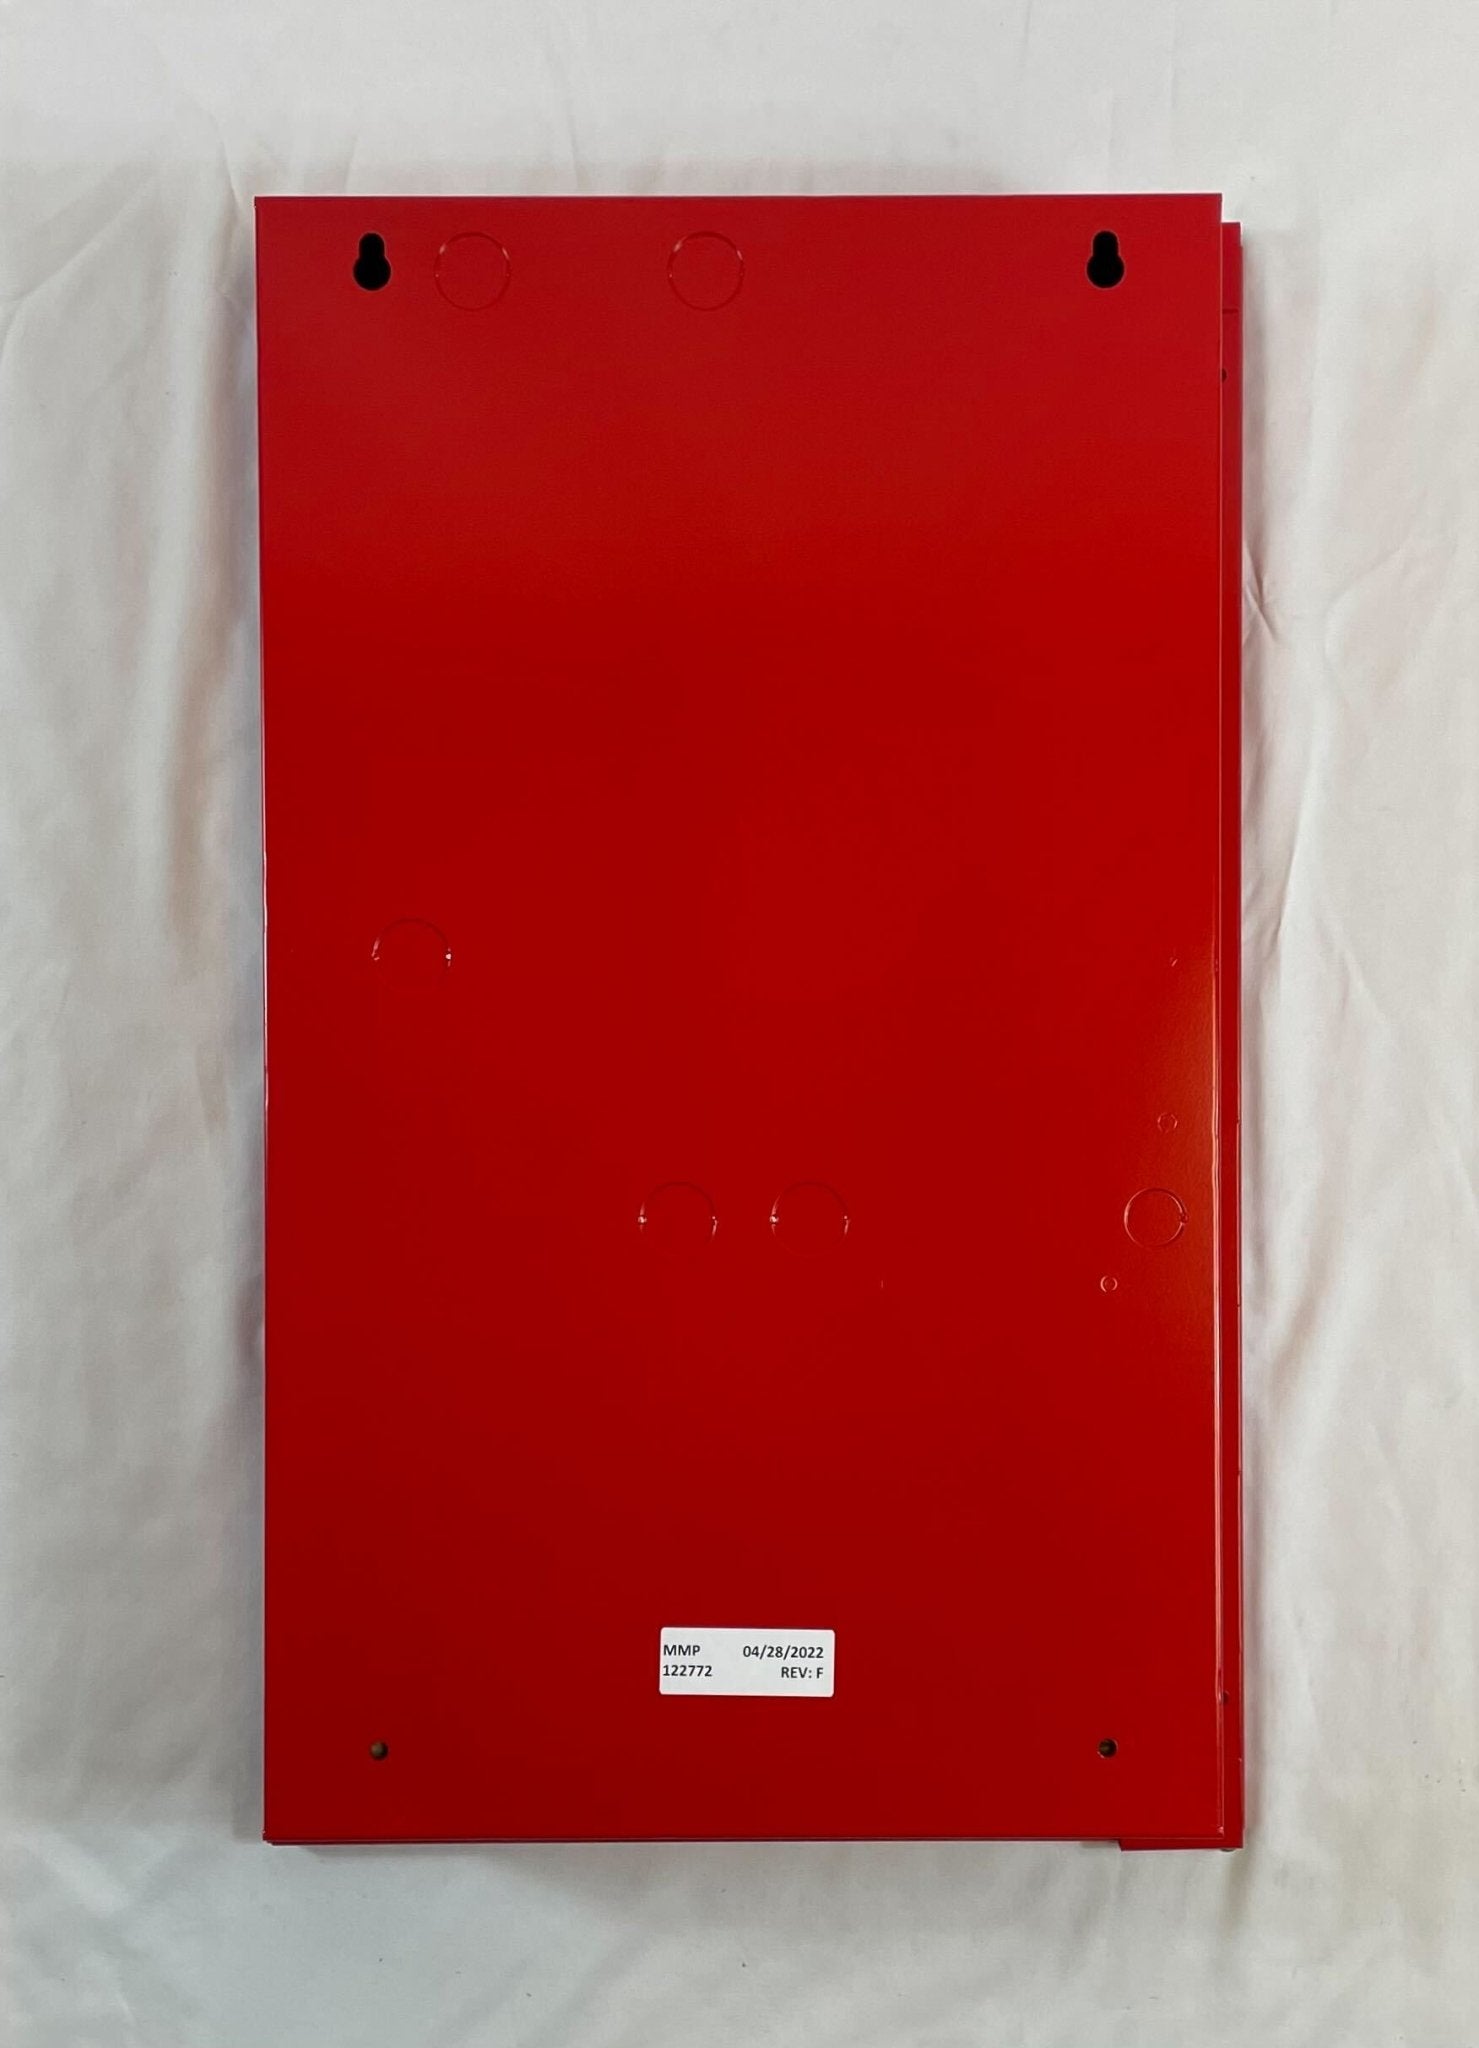 Silent Knight EVS-50W - The Fire Alarm Supplier